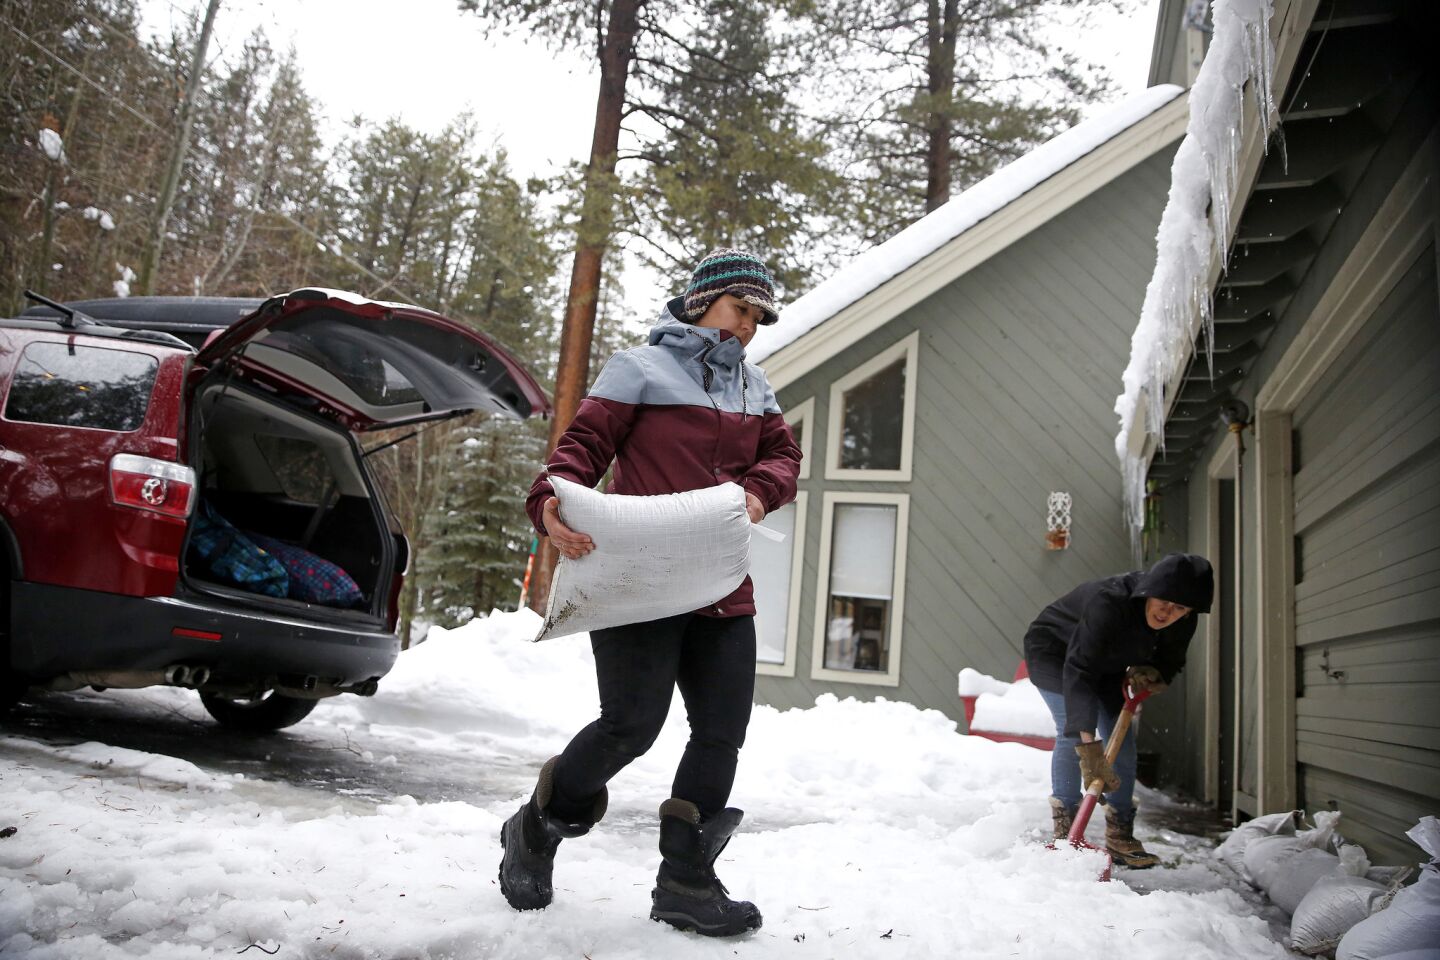 Monique Long hauls sandbags from her SUV to make a barrier to divert the rain and melting snow from flooding her garage, while her friend Jenna Shropshire, right, helps shovel snow, in Truckee, Calif.